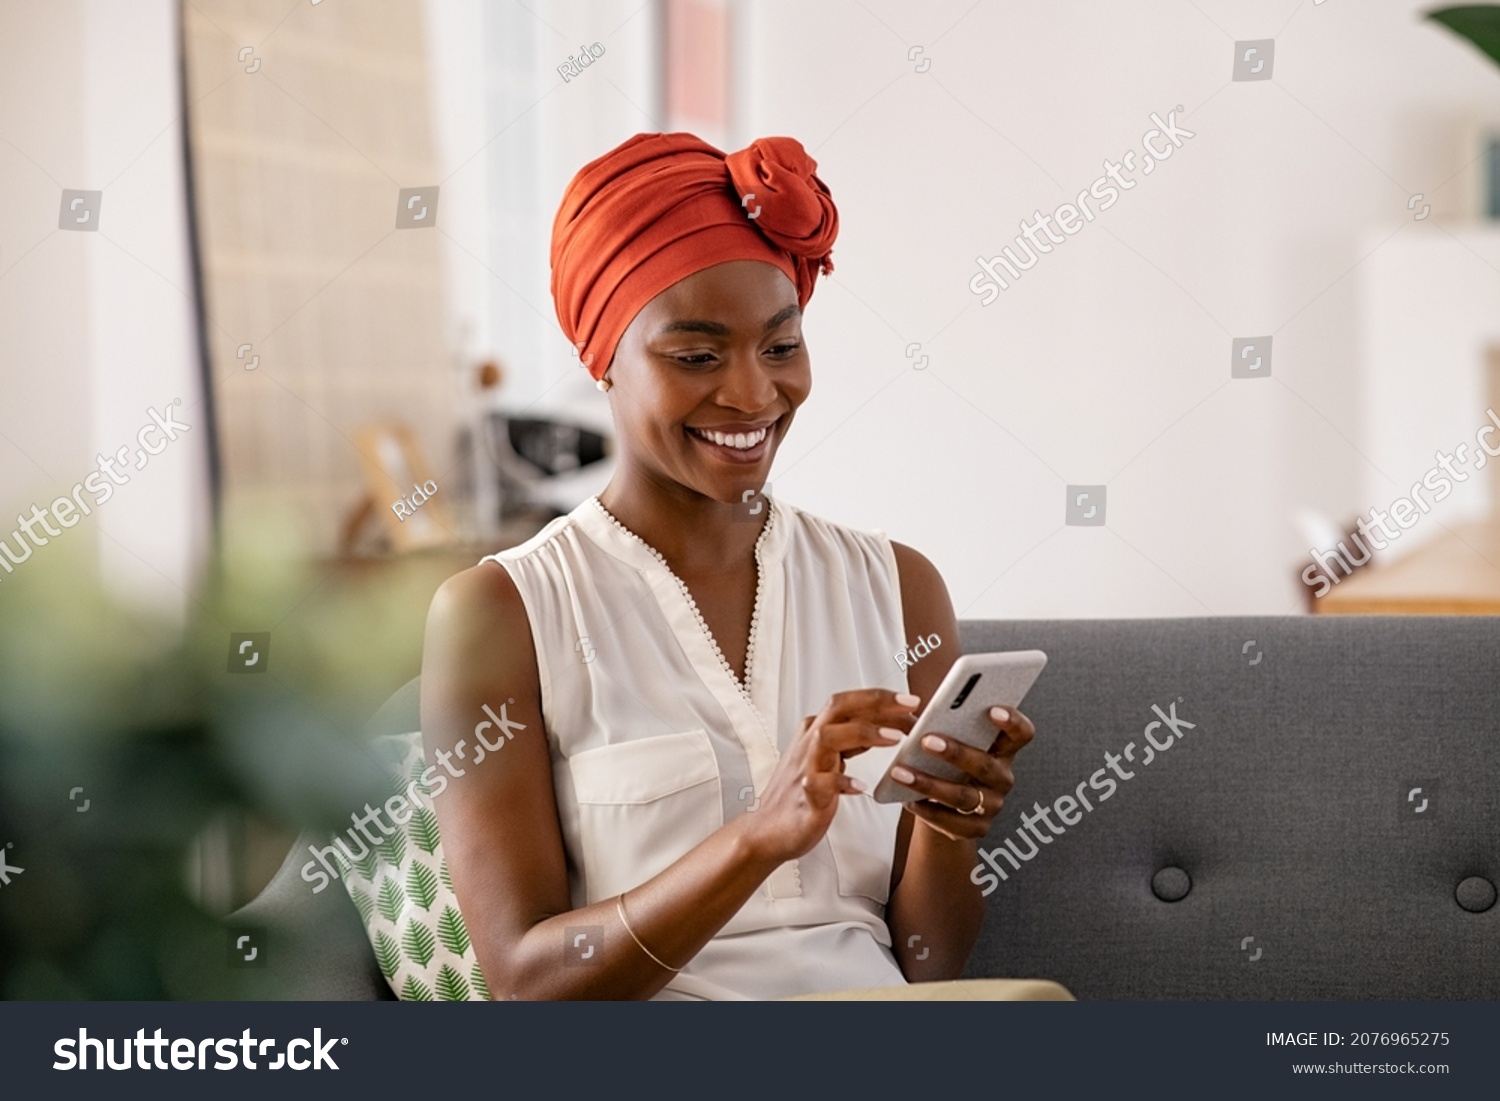 Smiling middle aged african woman with traditional head turban sitting on couch at home using smartphone. Beautiful african american woman with typical headscarf scrolling through internet on phone. #2076965275